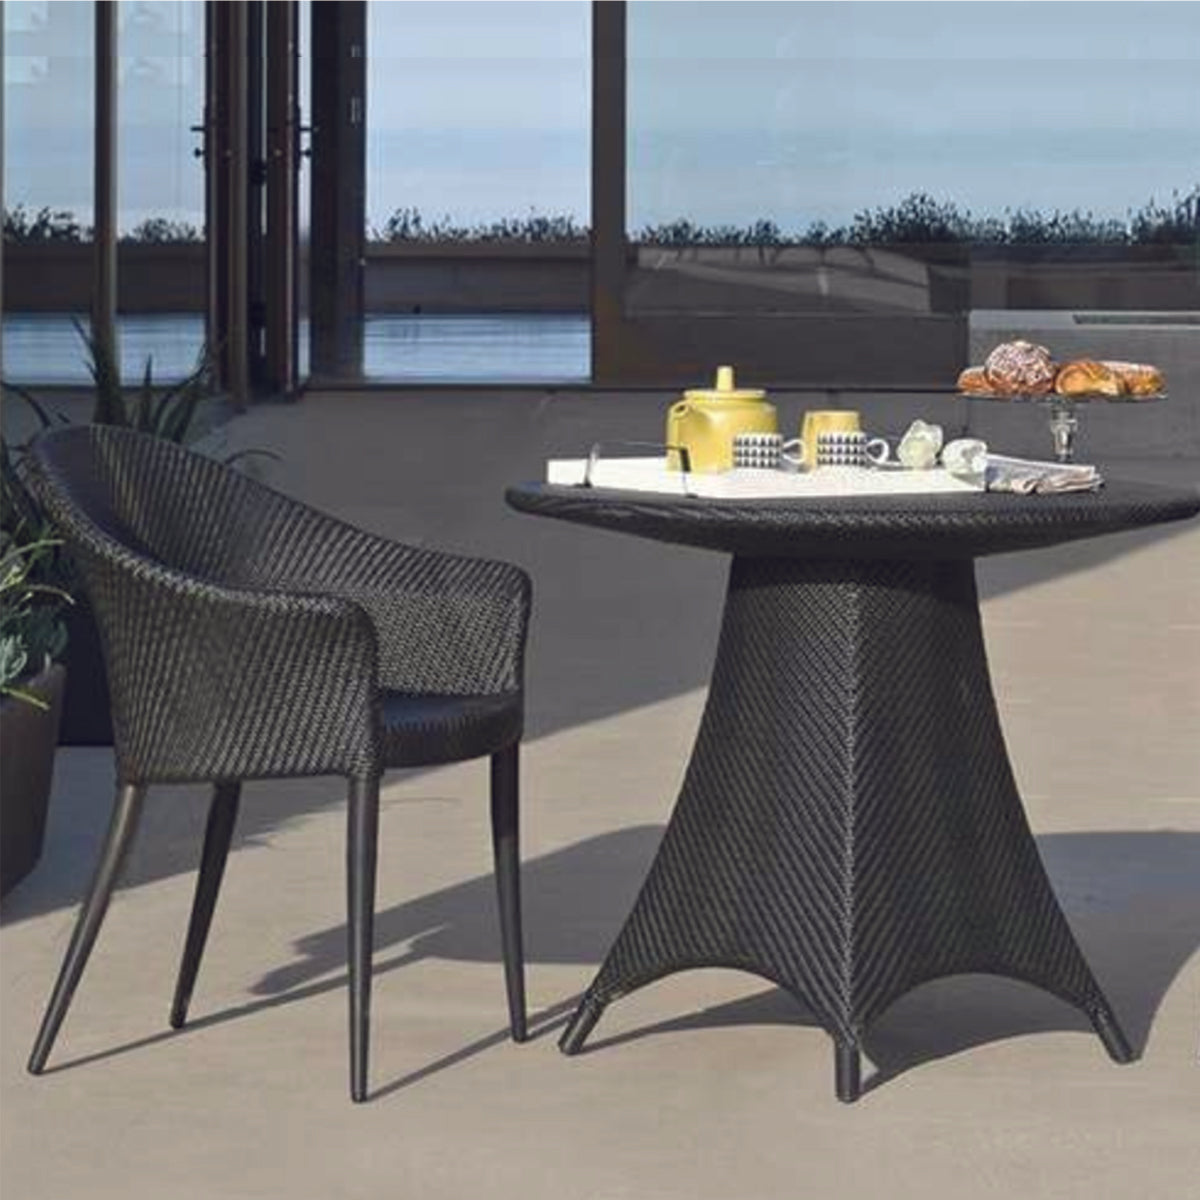 Wing Design Balcony Set with Table in Wicker <br>(VDC 631)